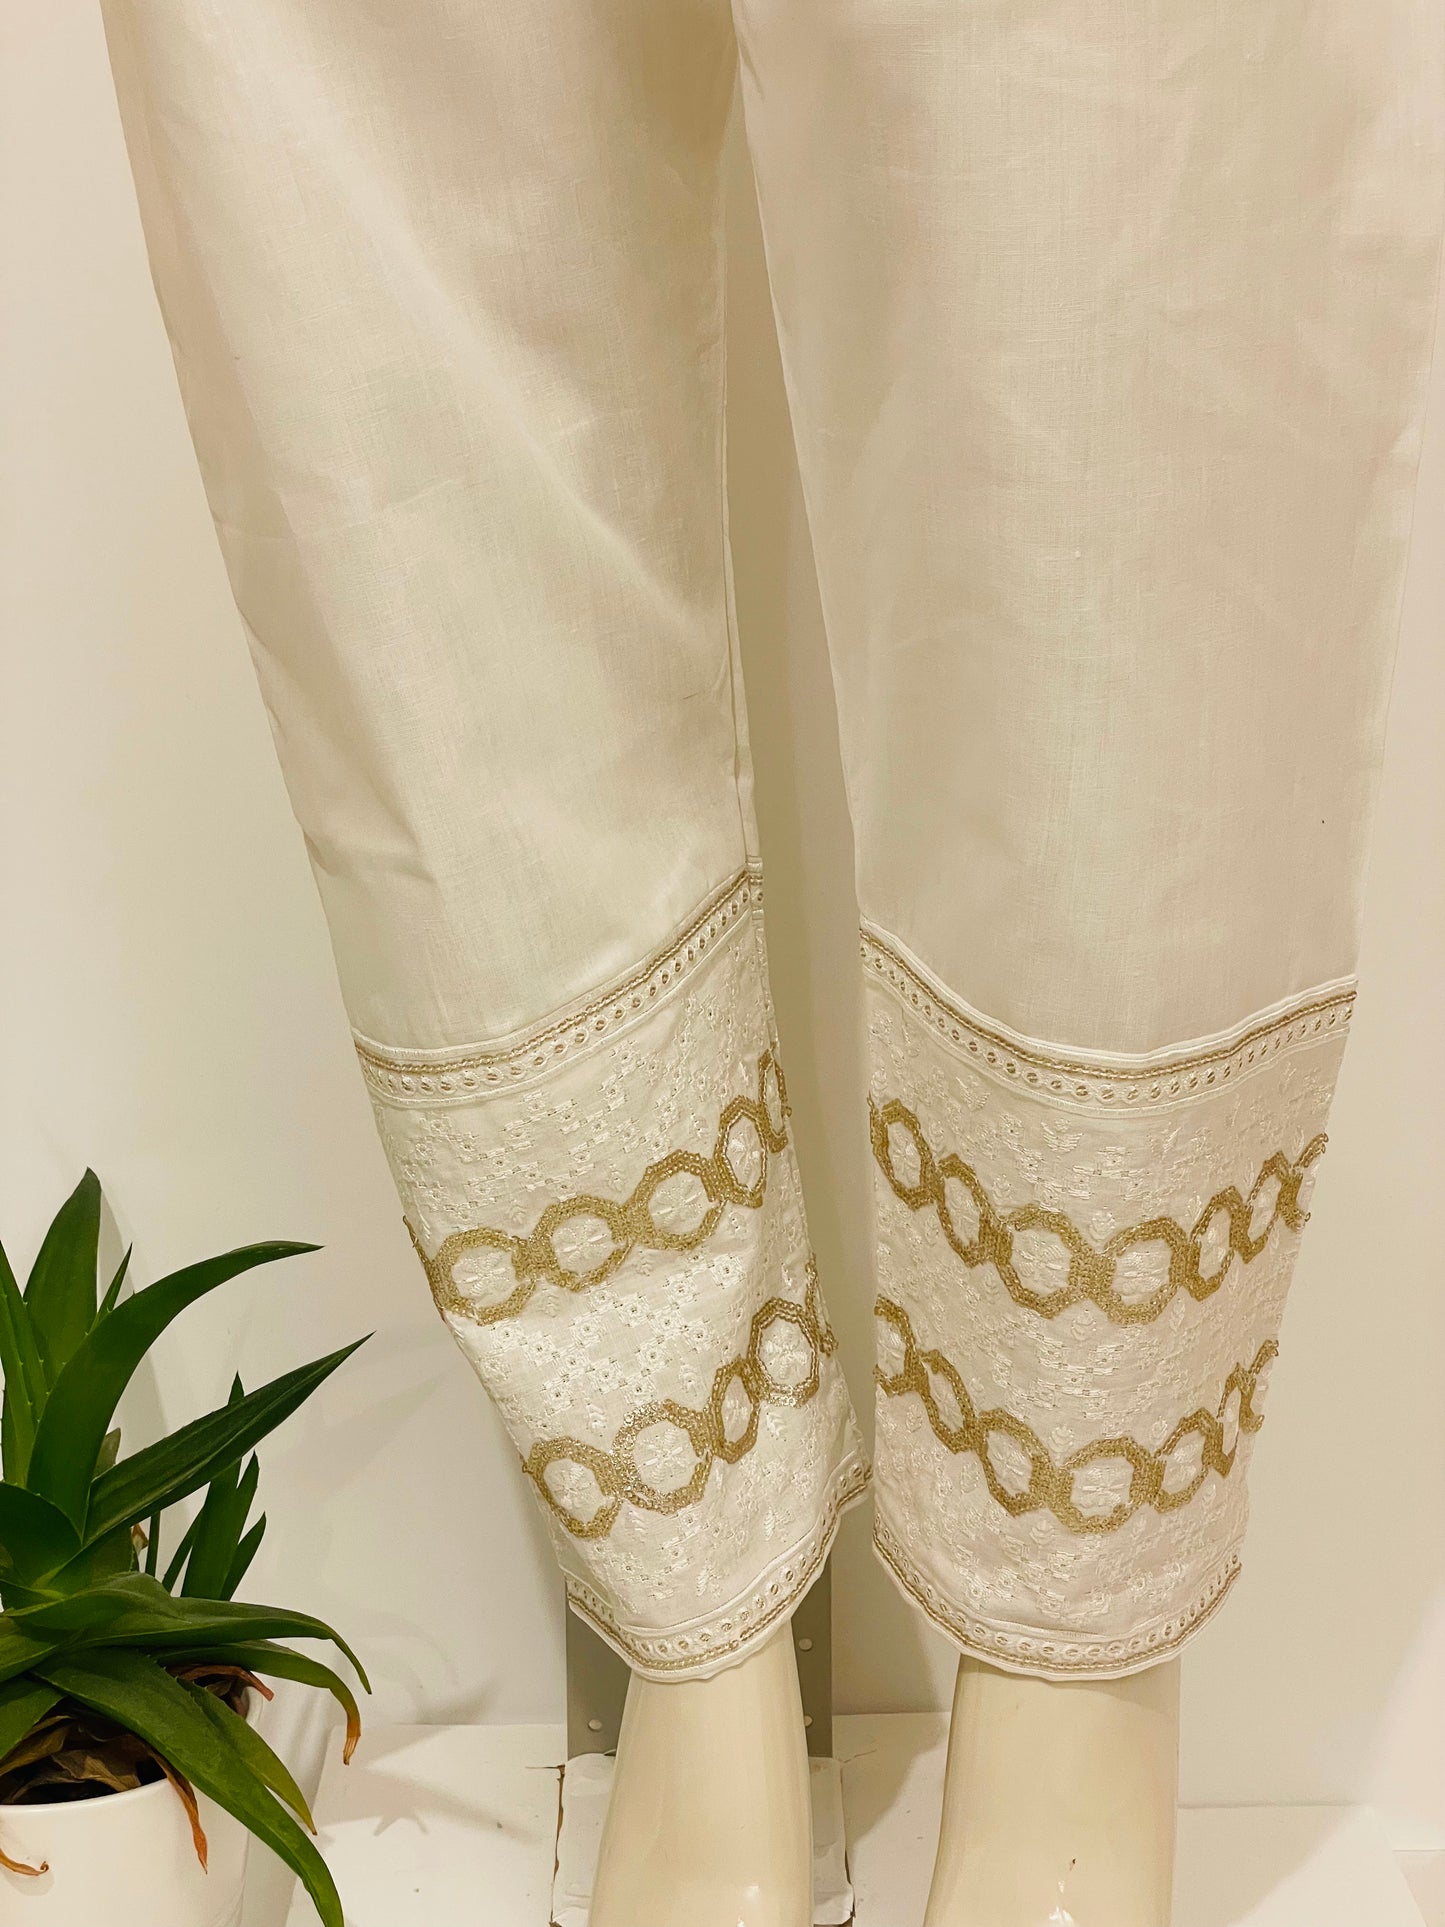 Locado Woolen Cream Colour Embroidery Palazzo Pants with Buttons on Surface.